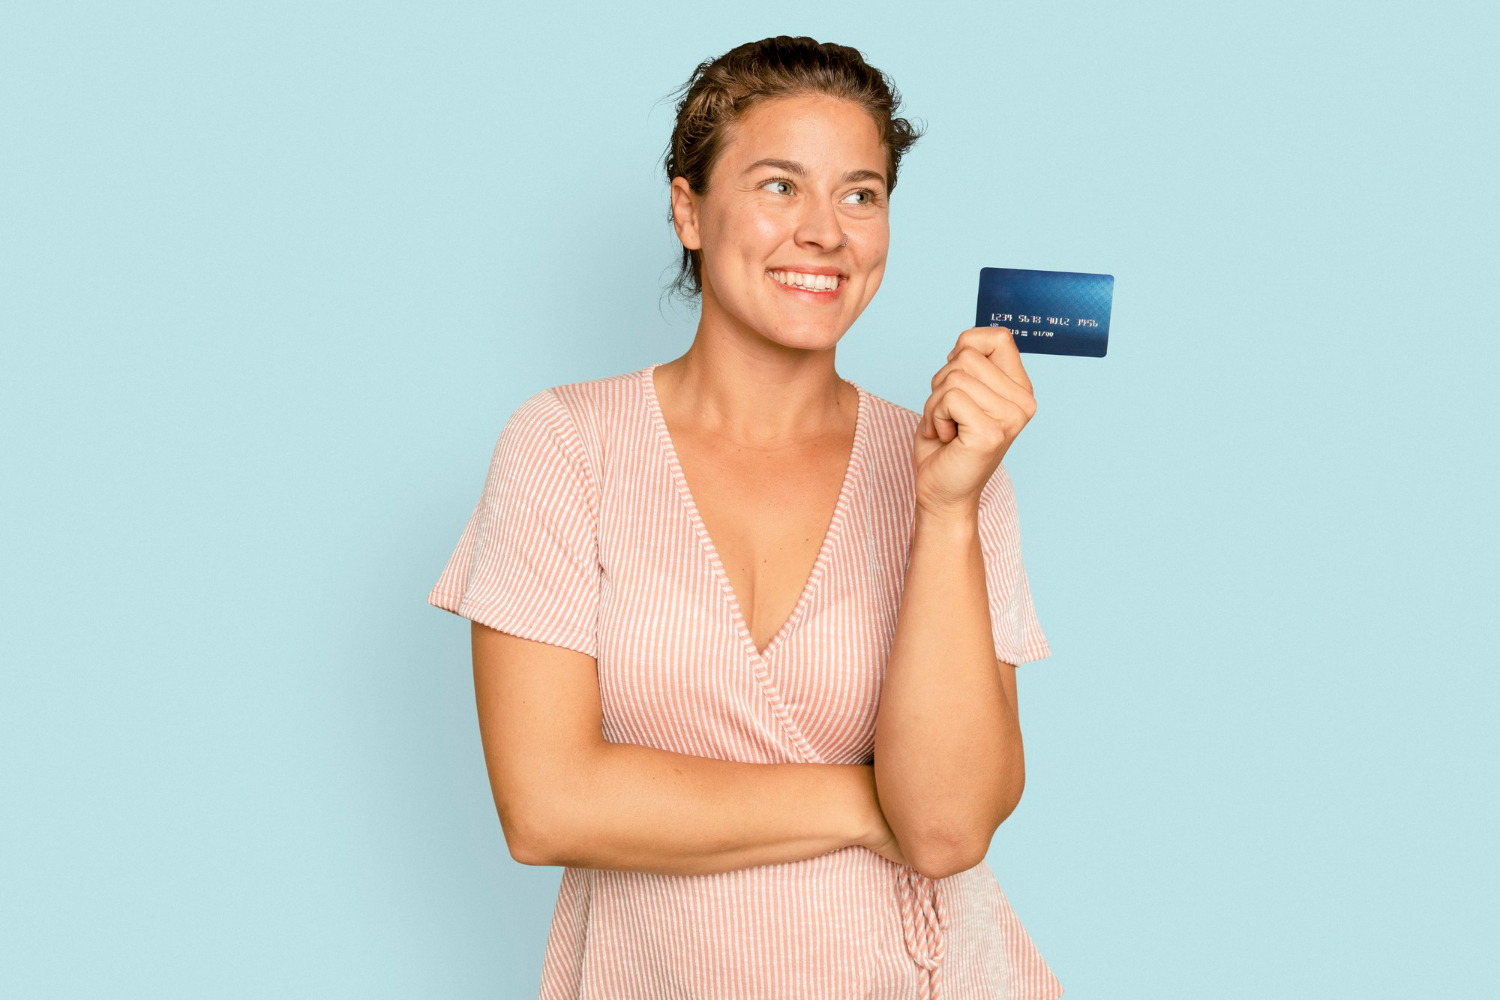 Capital One Platinum Credit Card: Check How to Get Yours!